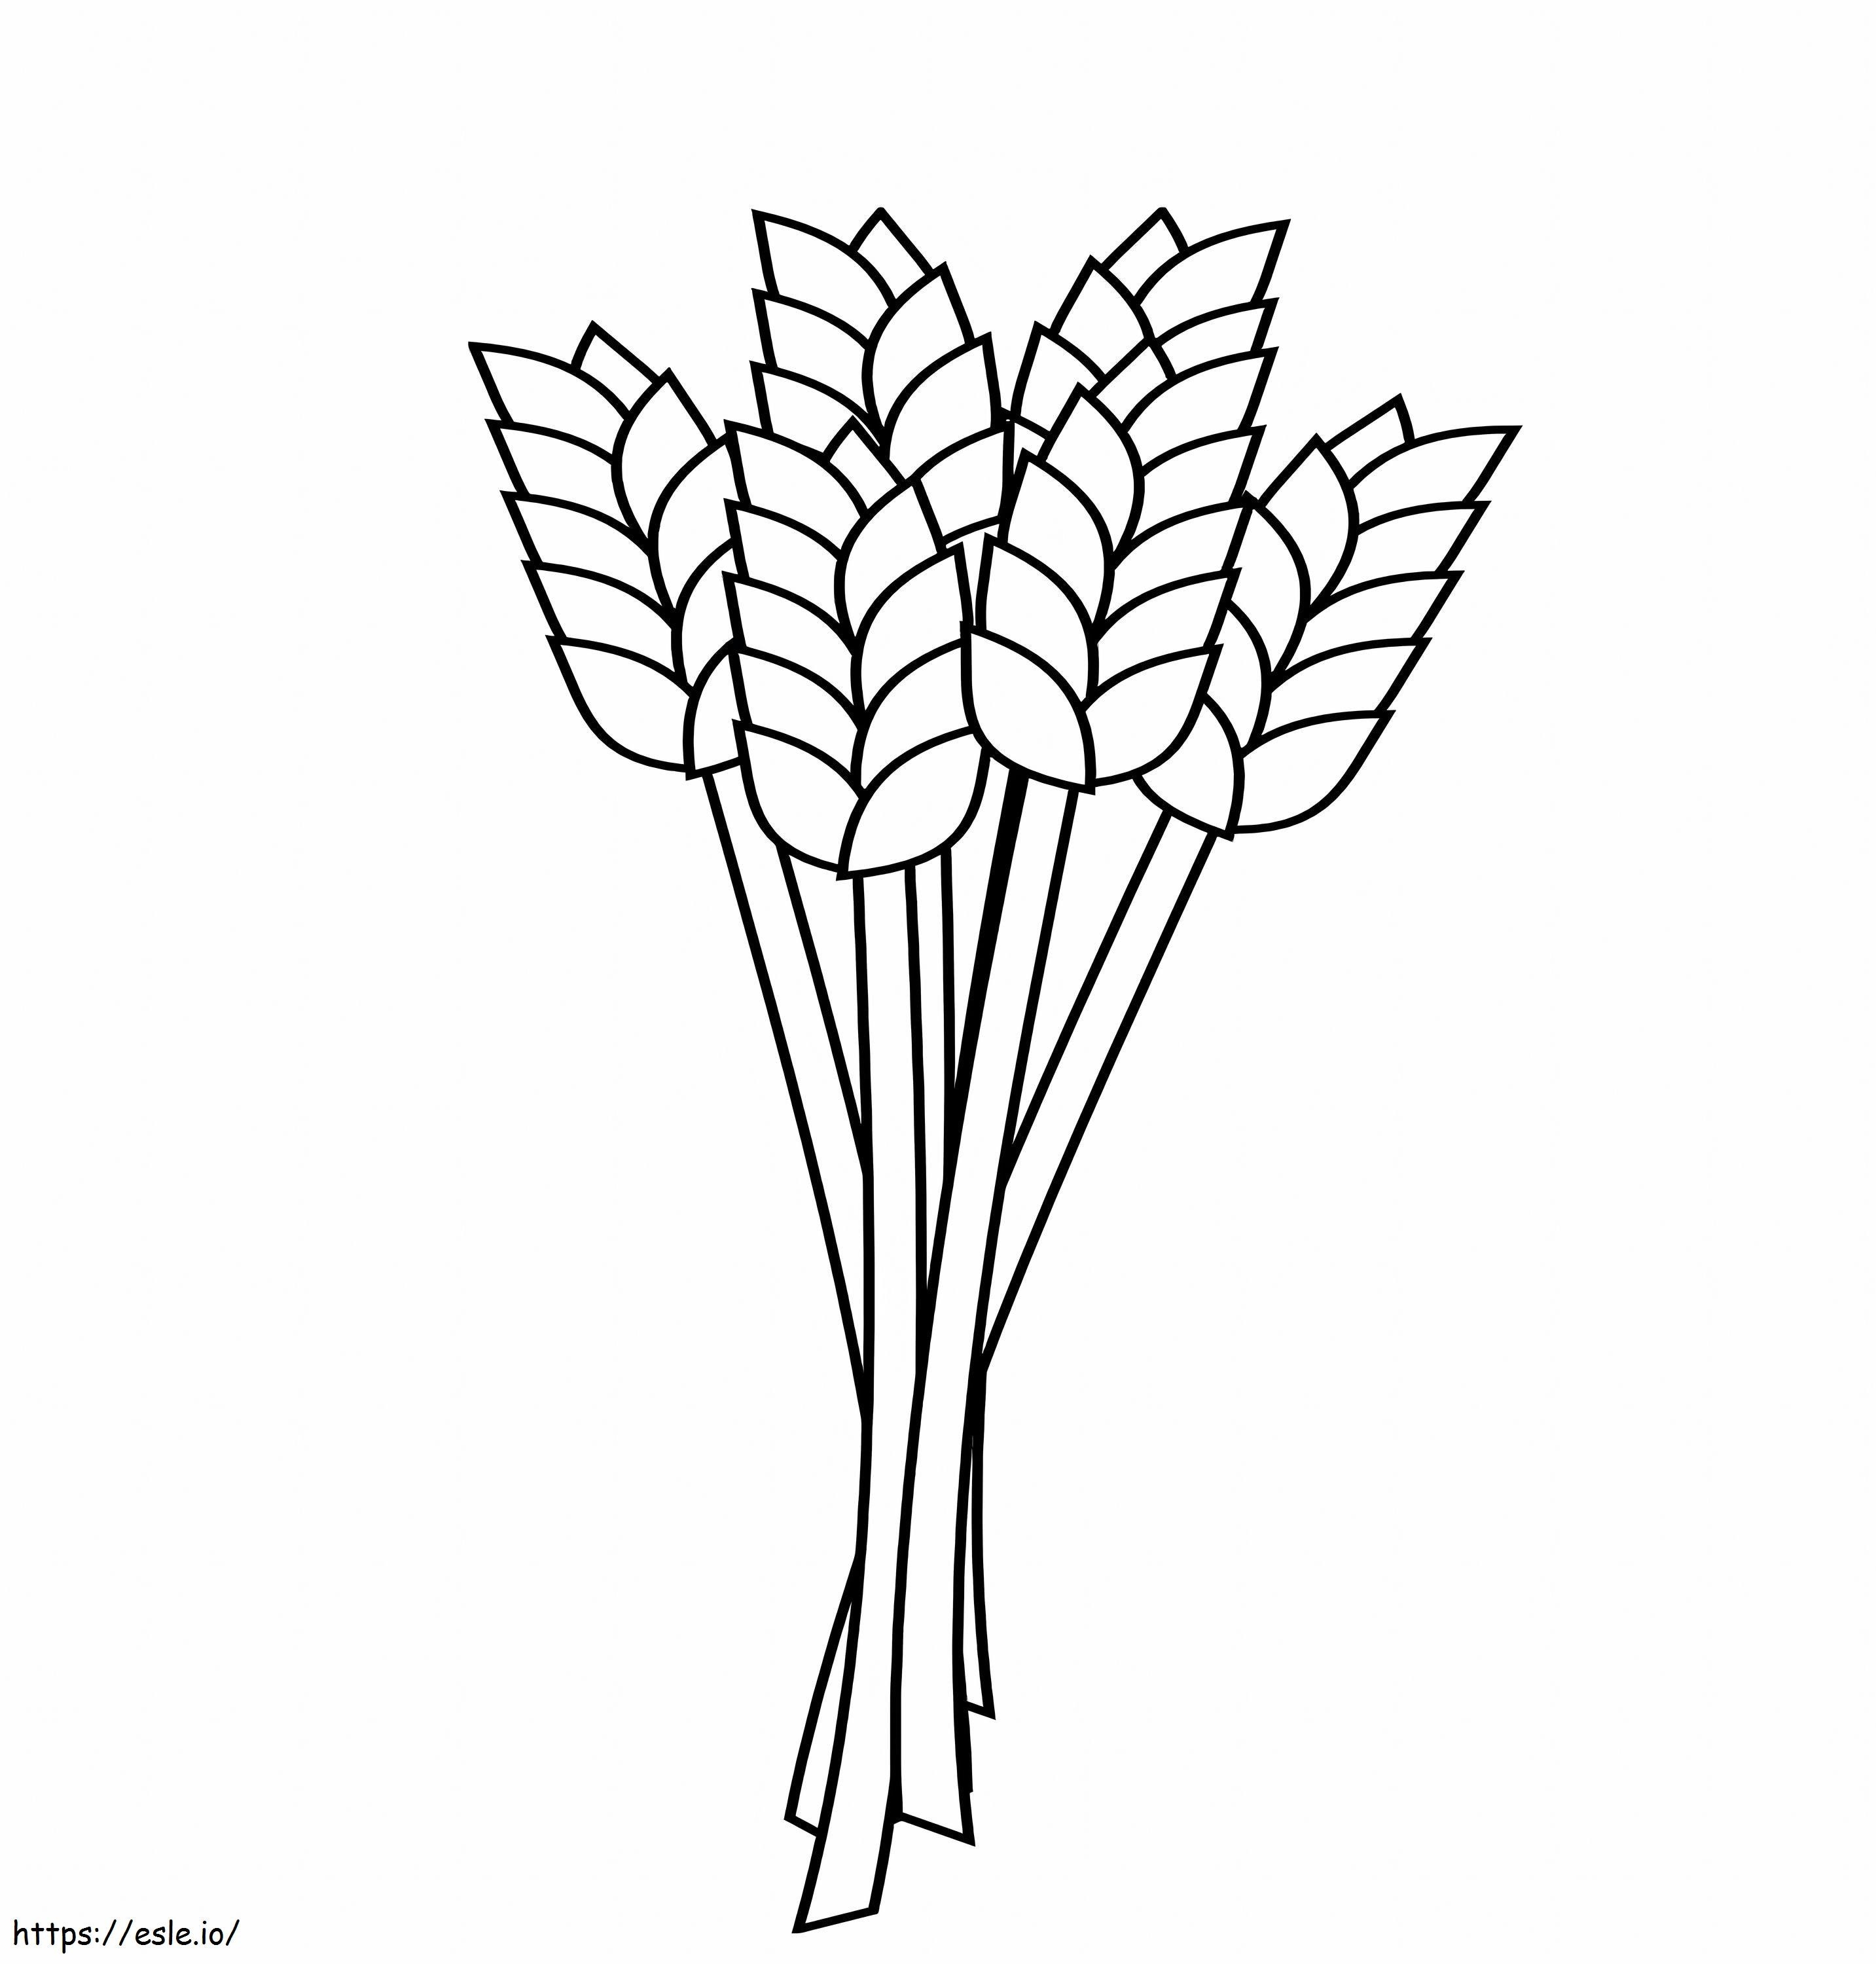 Great Wheat coloring page